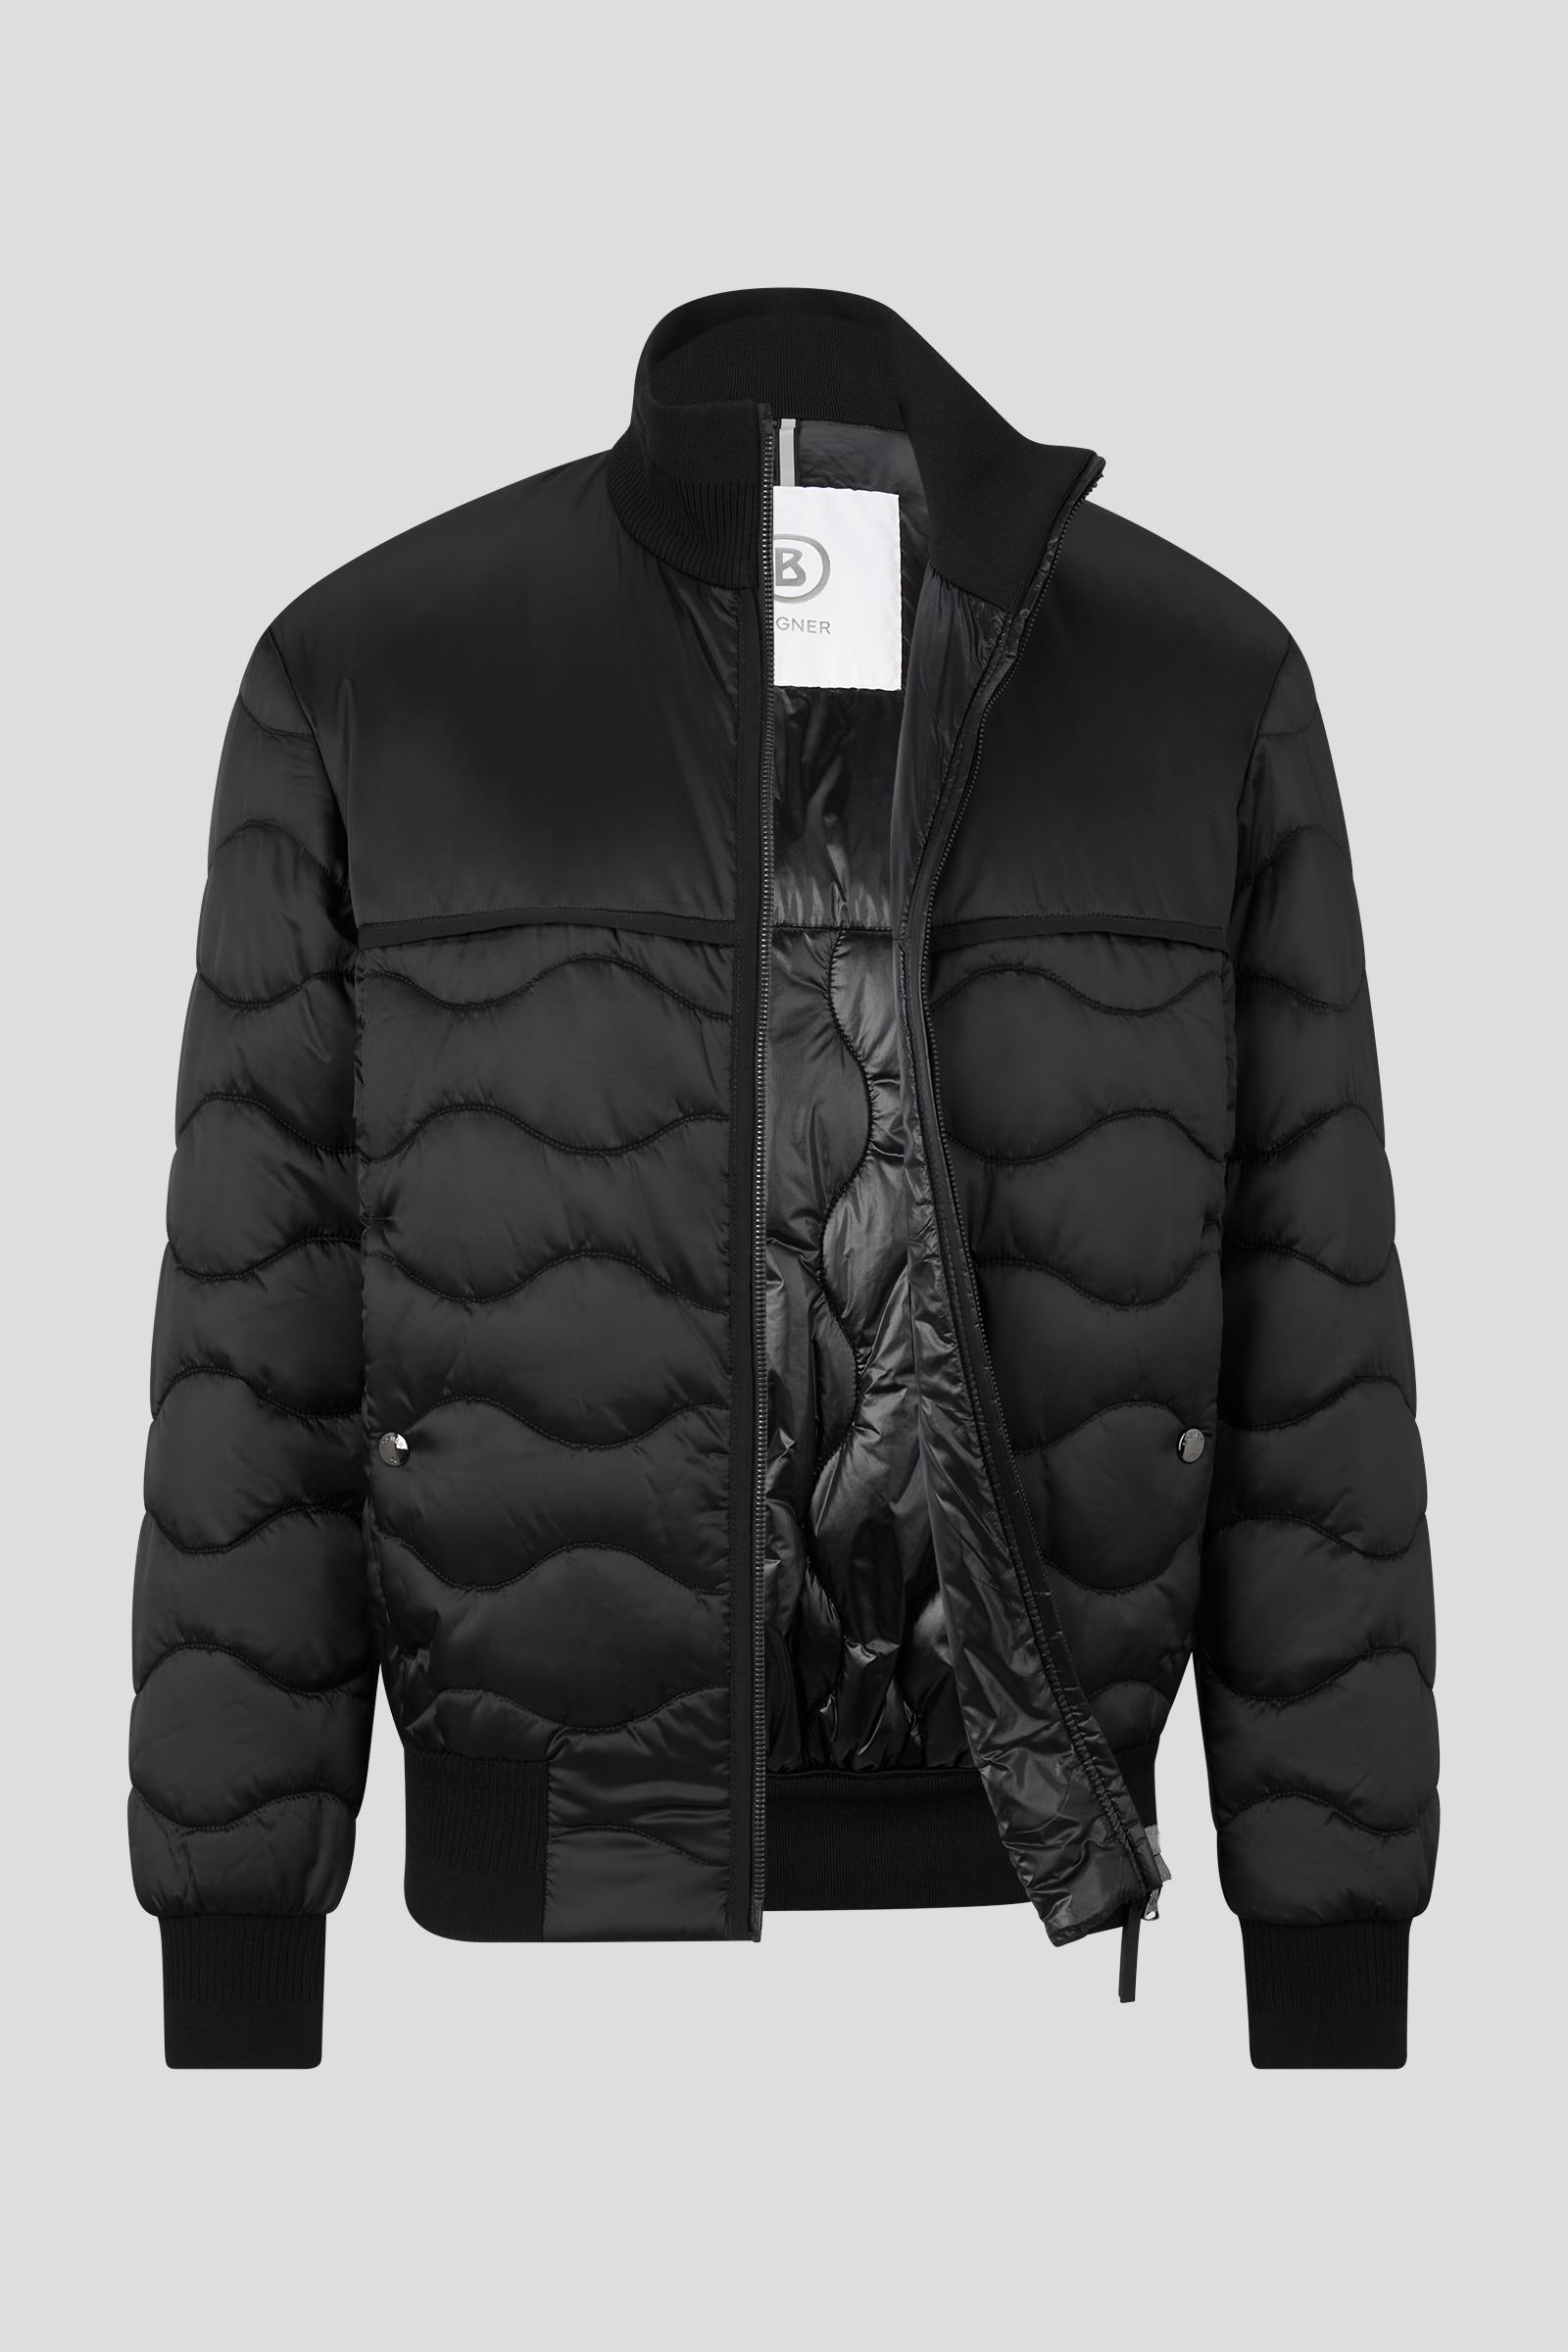 Bogner Synthetic Lewin Quilted Jacket in Black for Men | Lyst